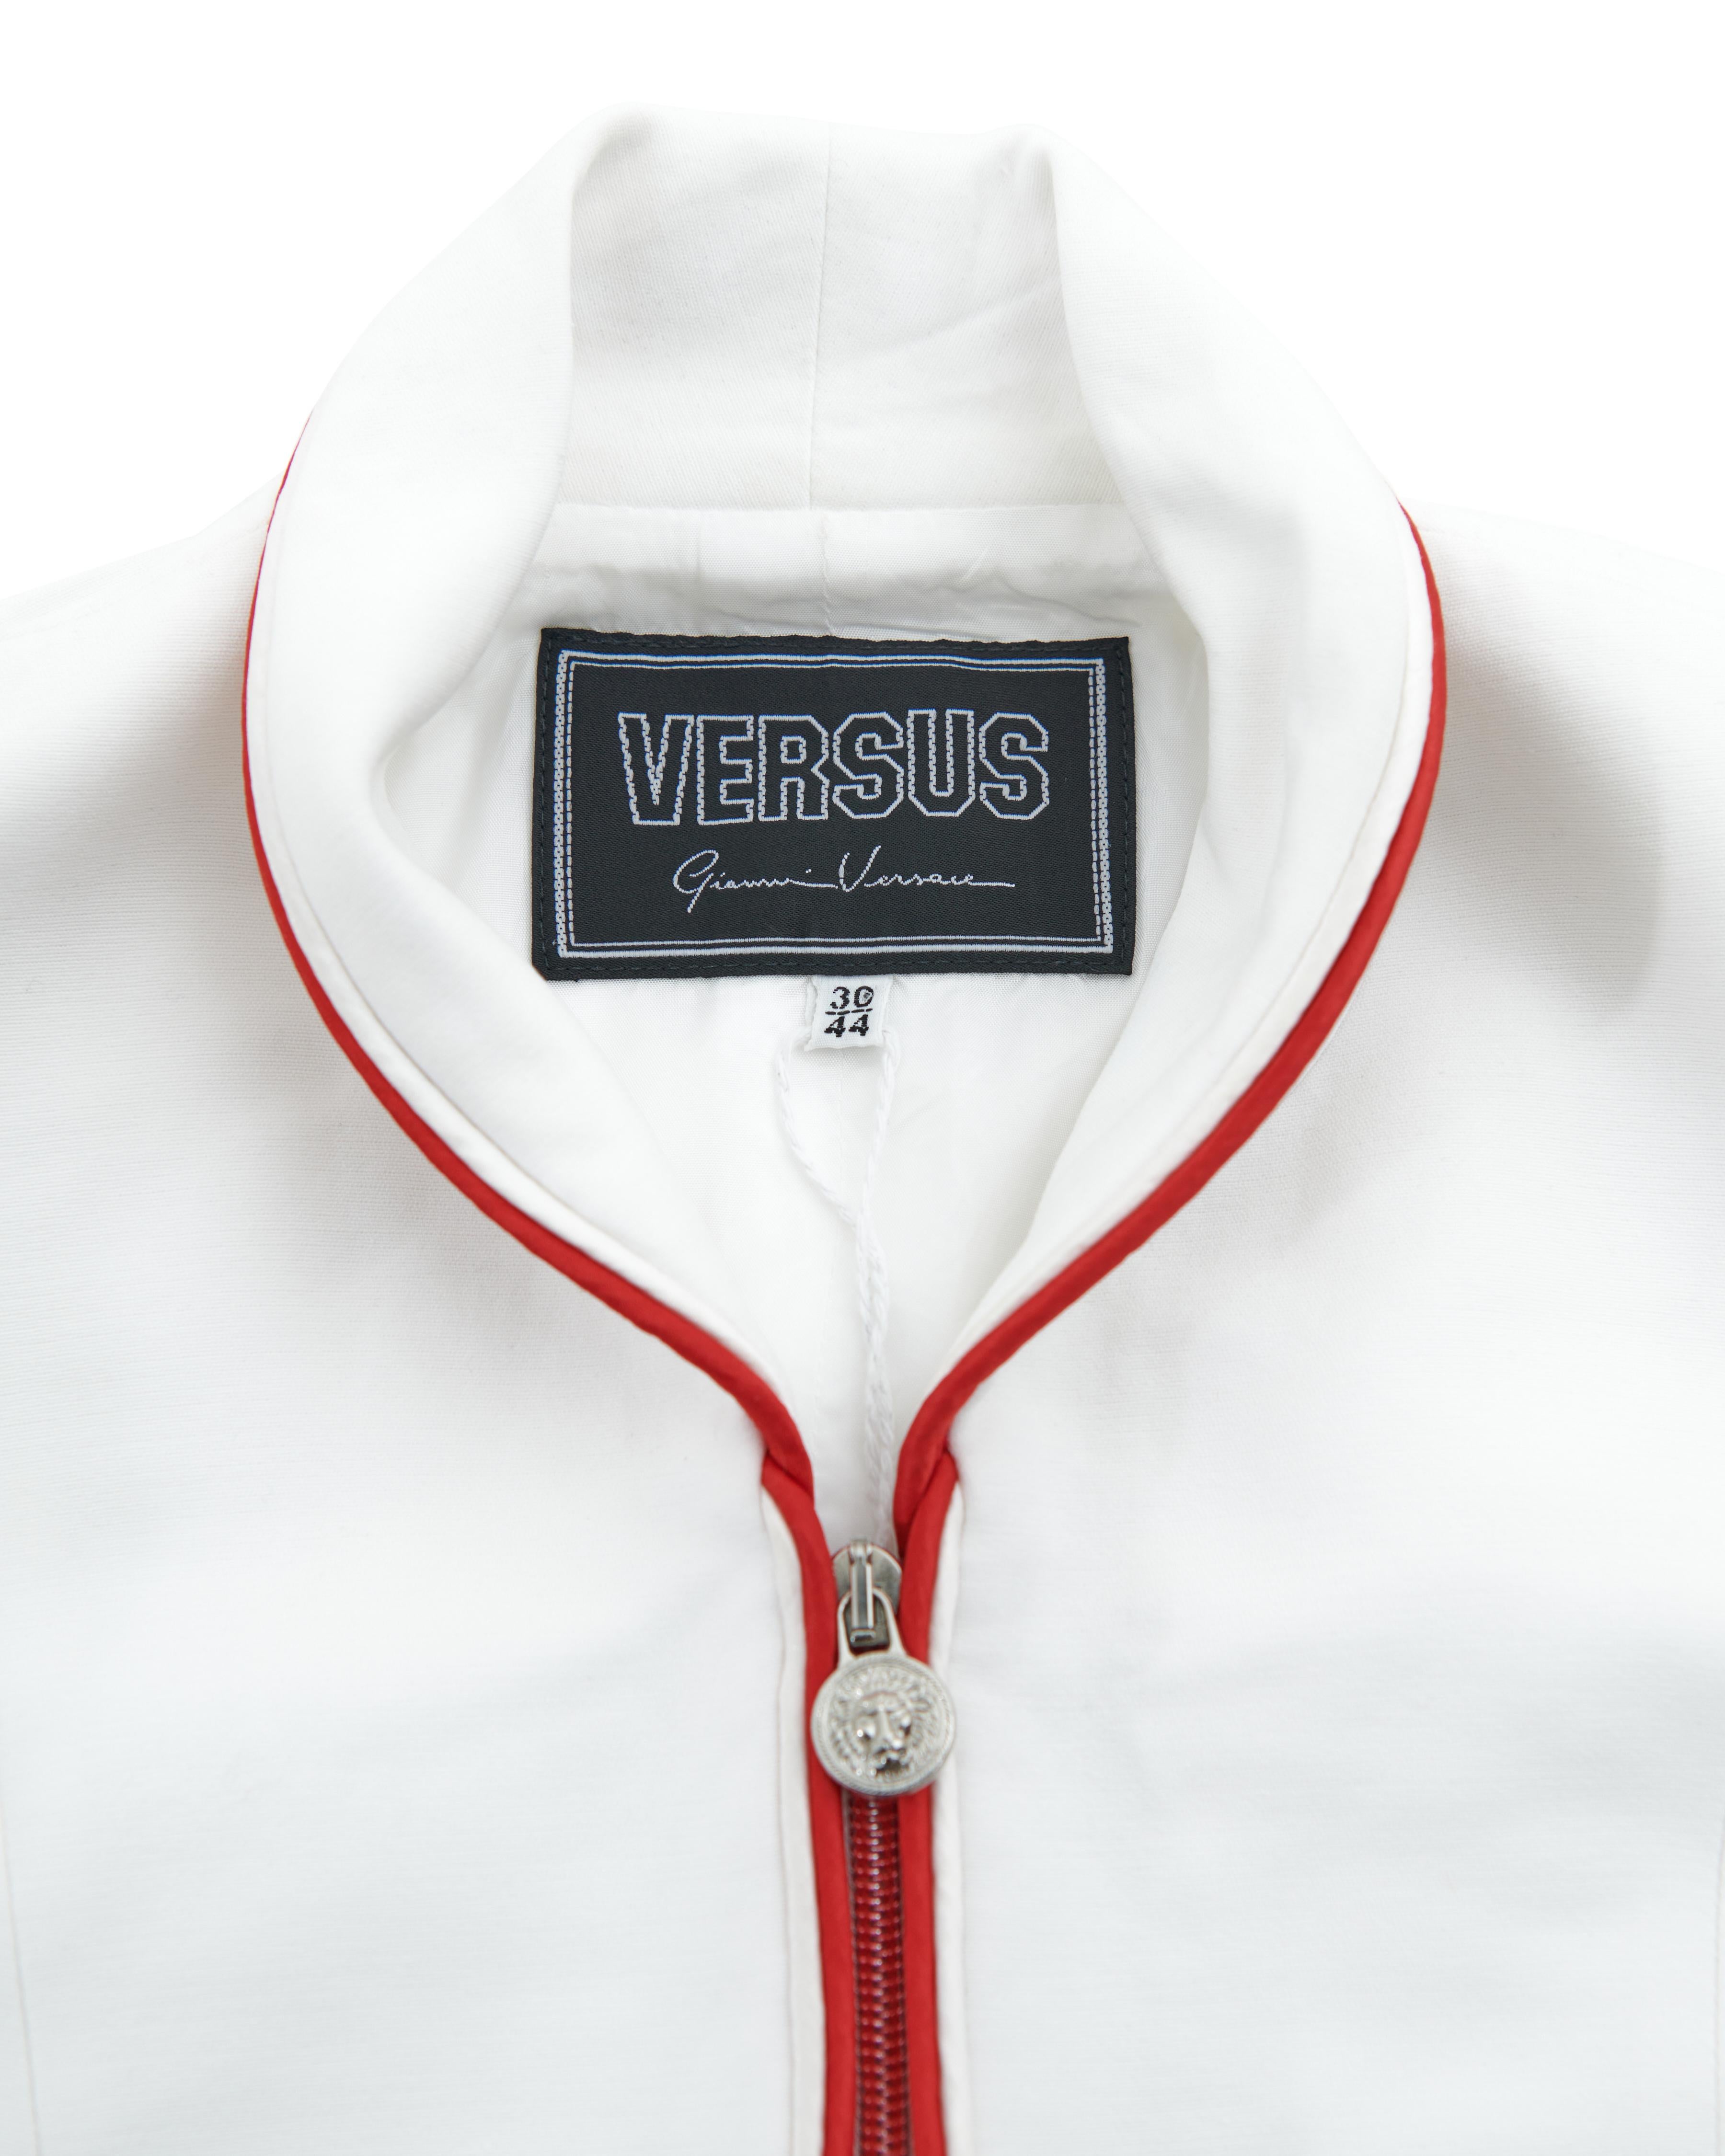 Versus by Gianni Versace Early 1990s White cotton dress and crop jacket set For Sale 2